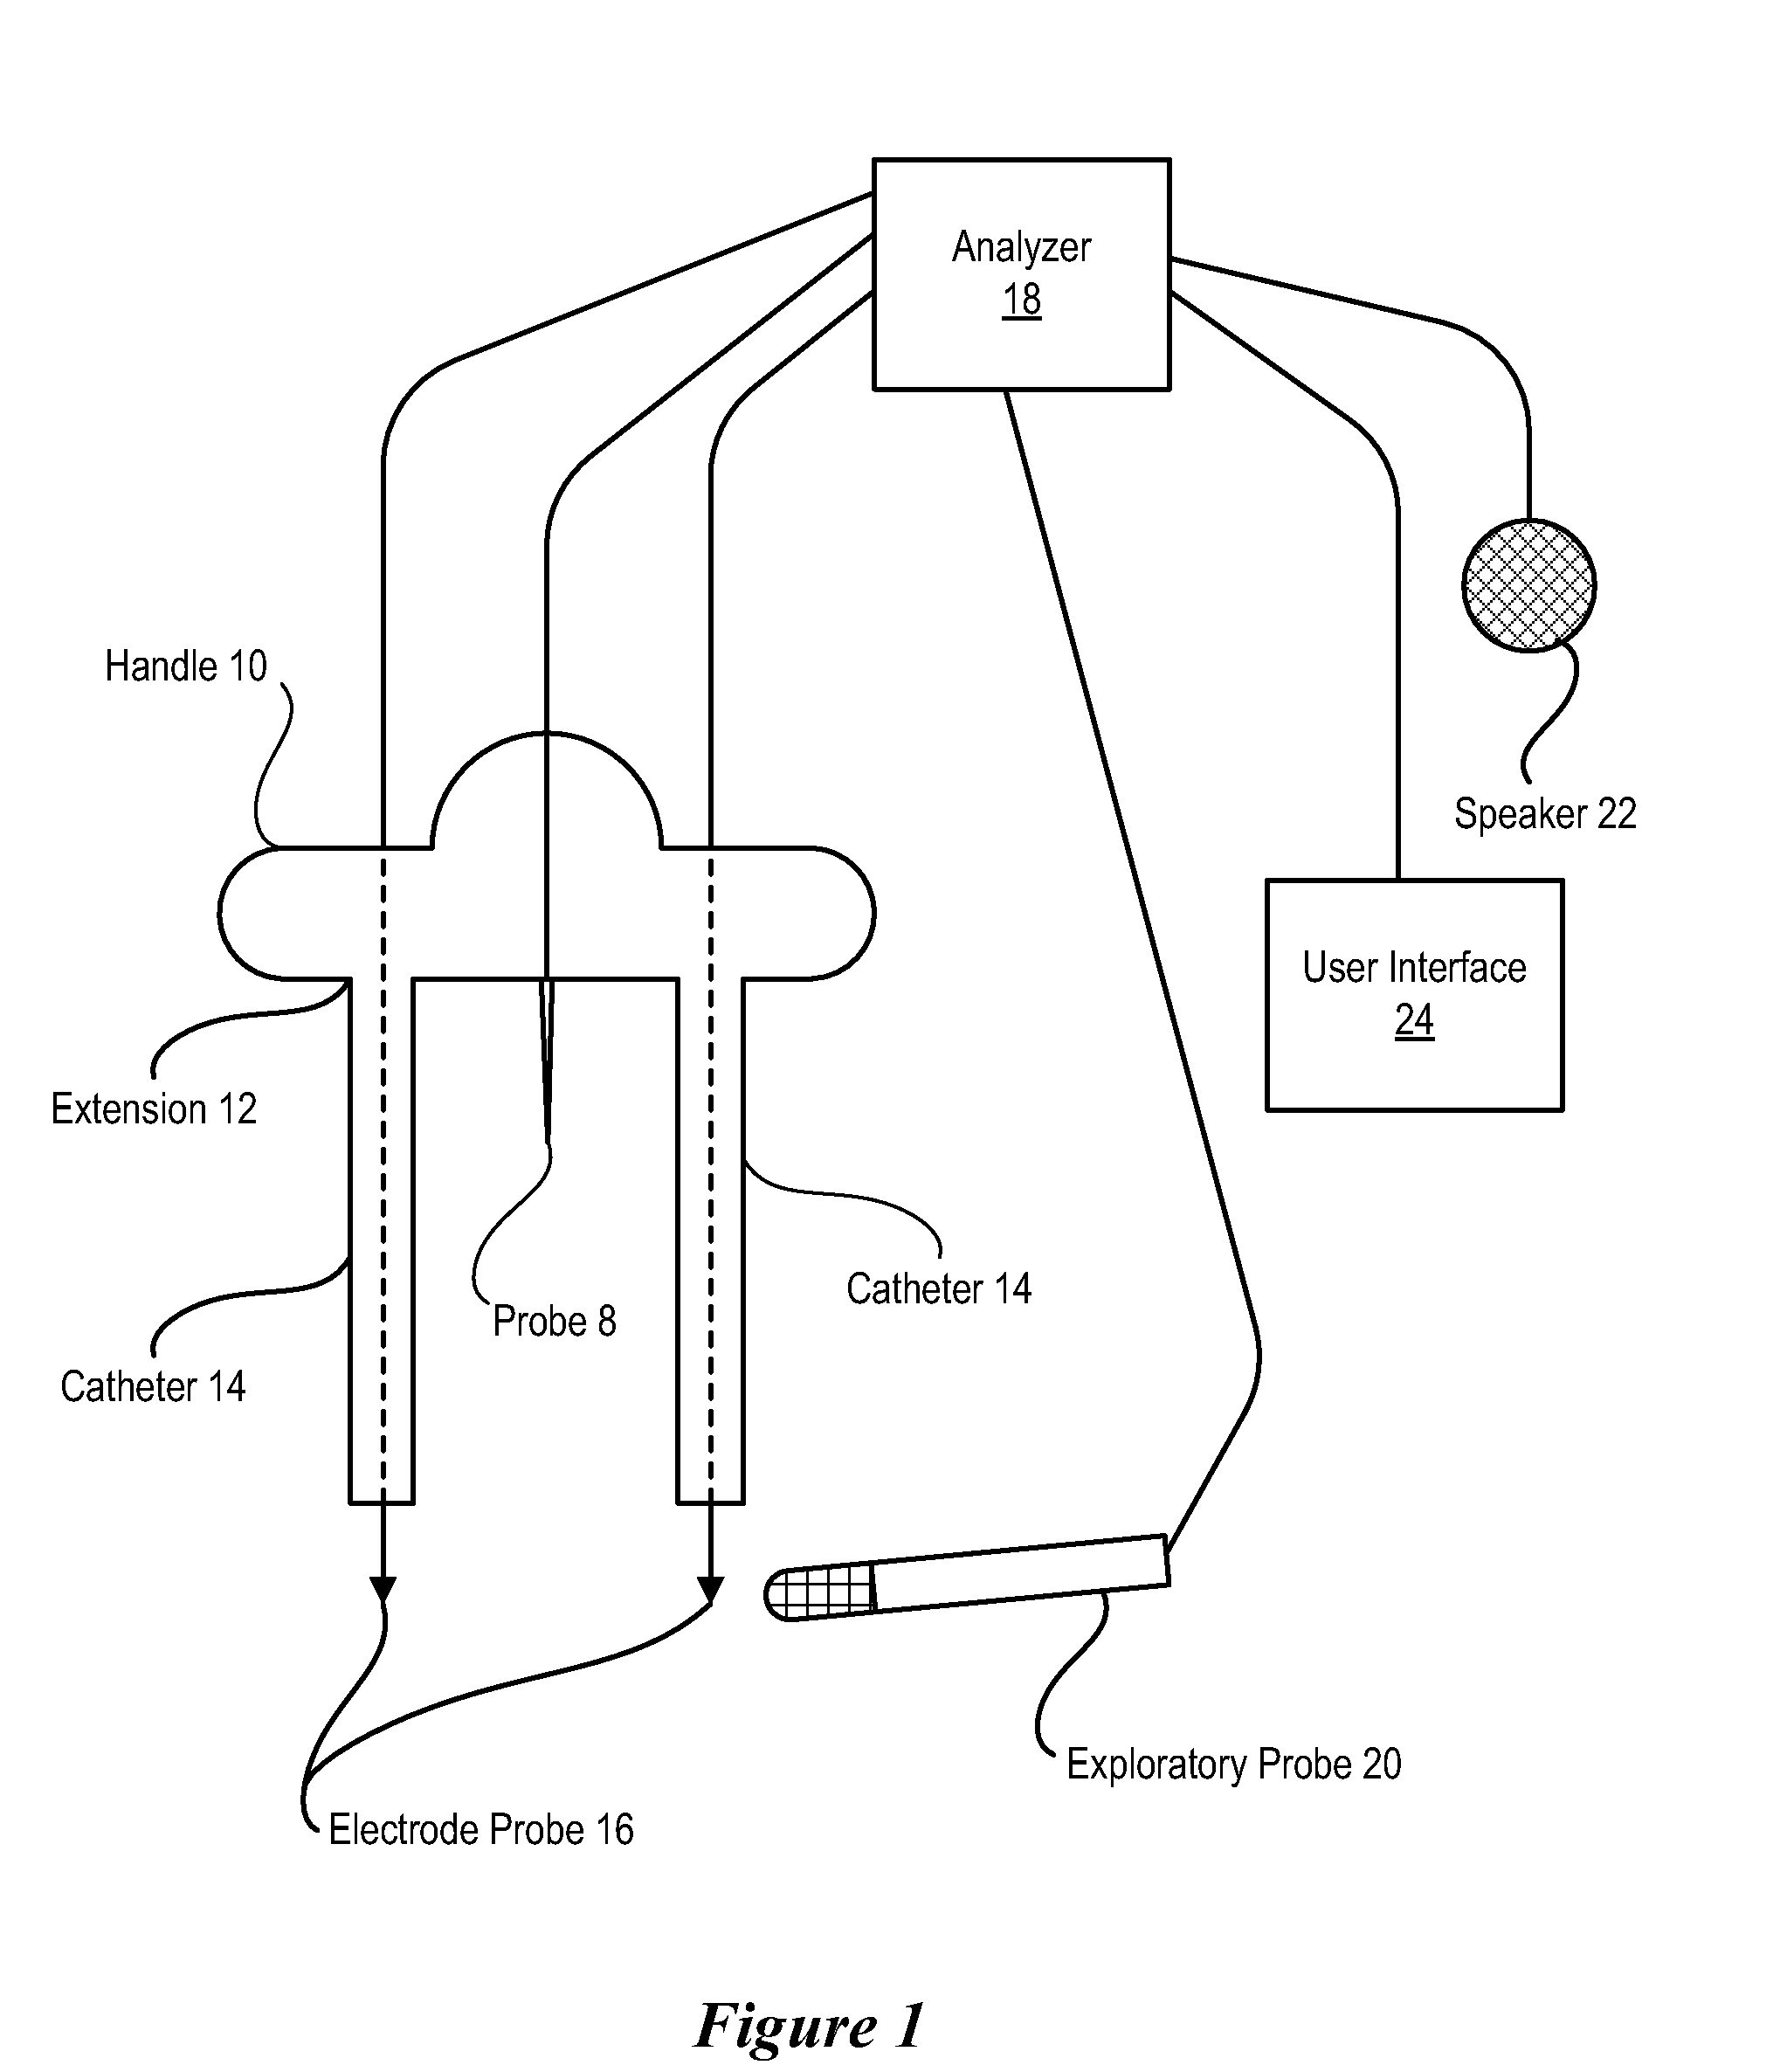 System and Method for Laparoscopic Nerve Detection